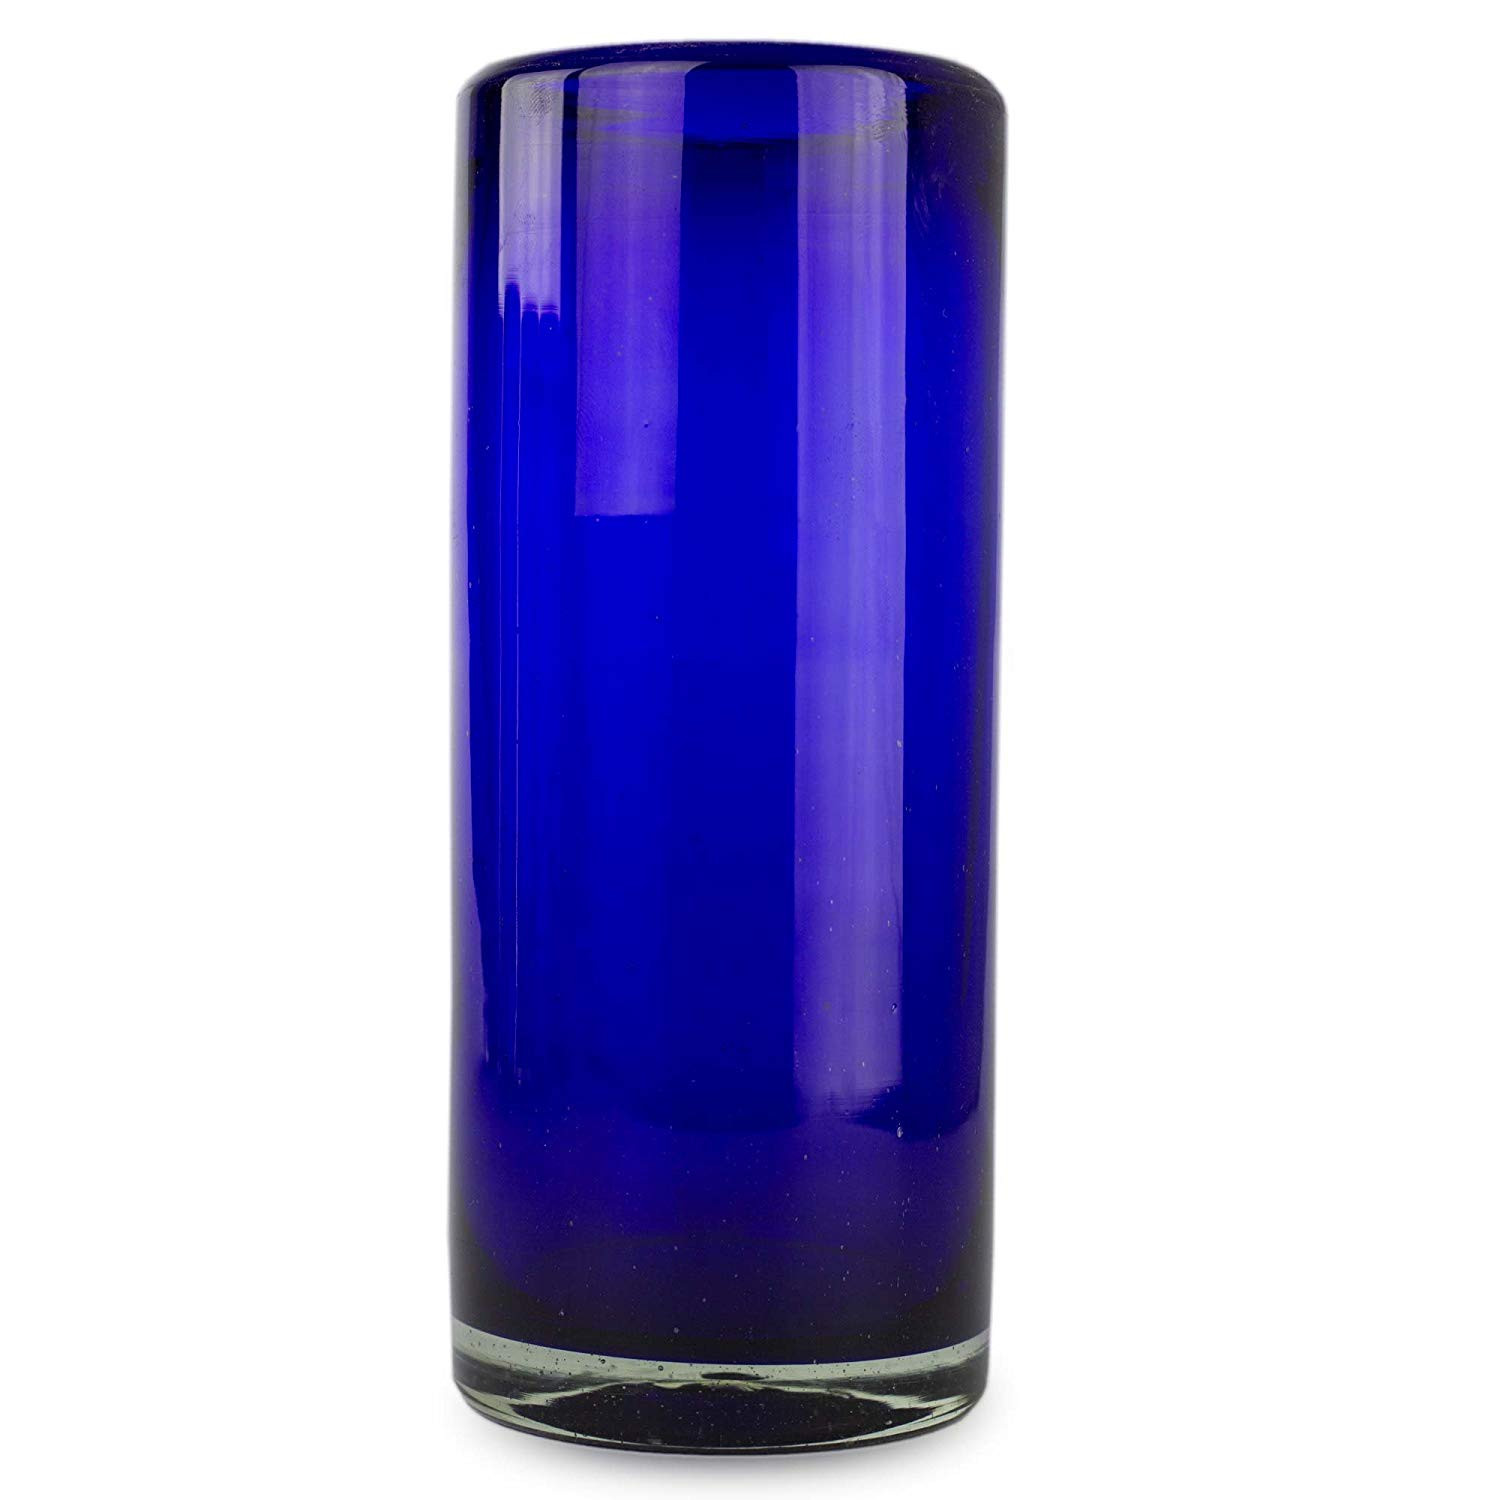 12 Perfect Heavy Blue Glass Vase 2024 free download heavy blue glass vase of amazon com novica artisan crafted dark blue recycled glass hand throughout amazon com novica artisan crafted dark blue recycled glass hand blown cocktail glasses 13 